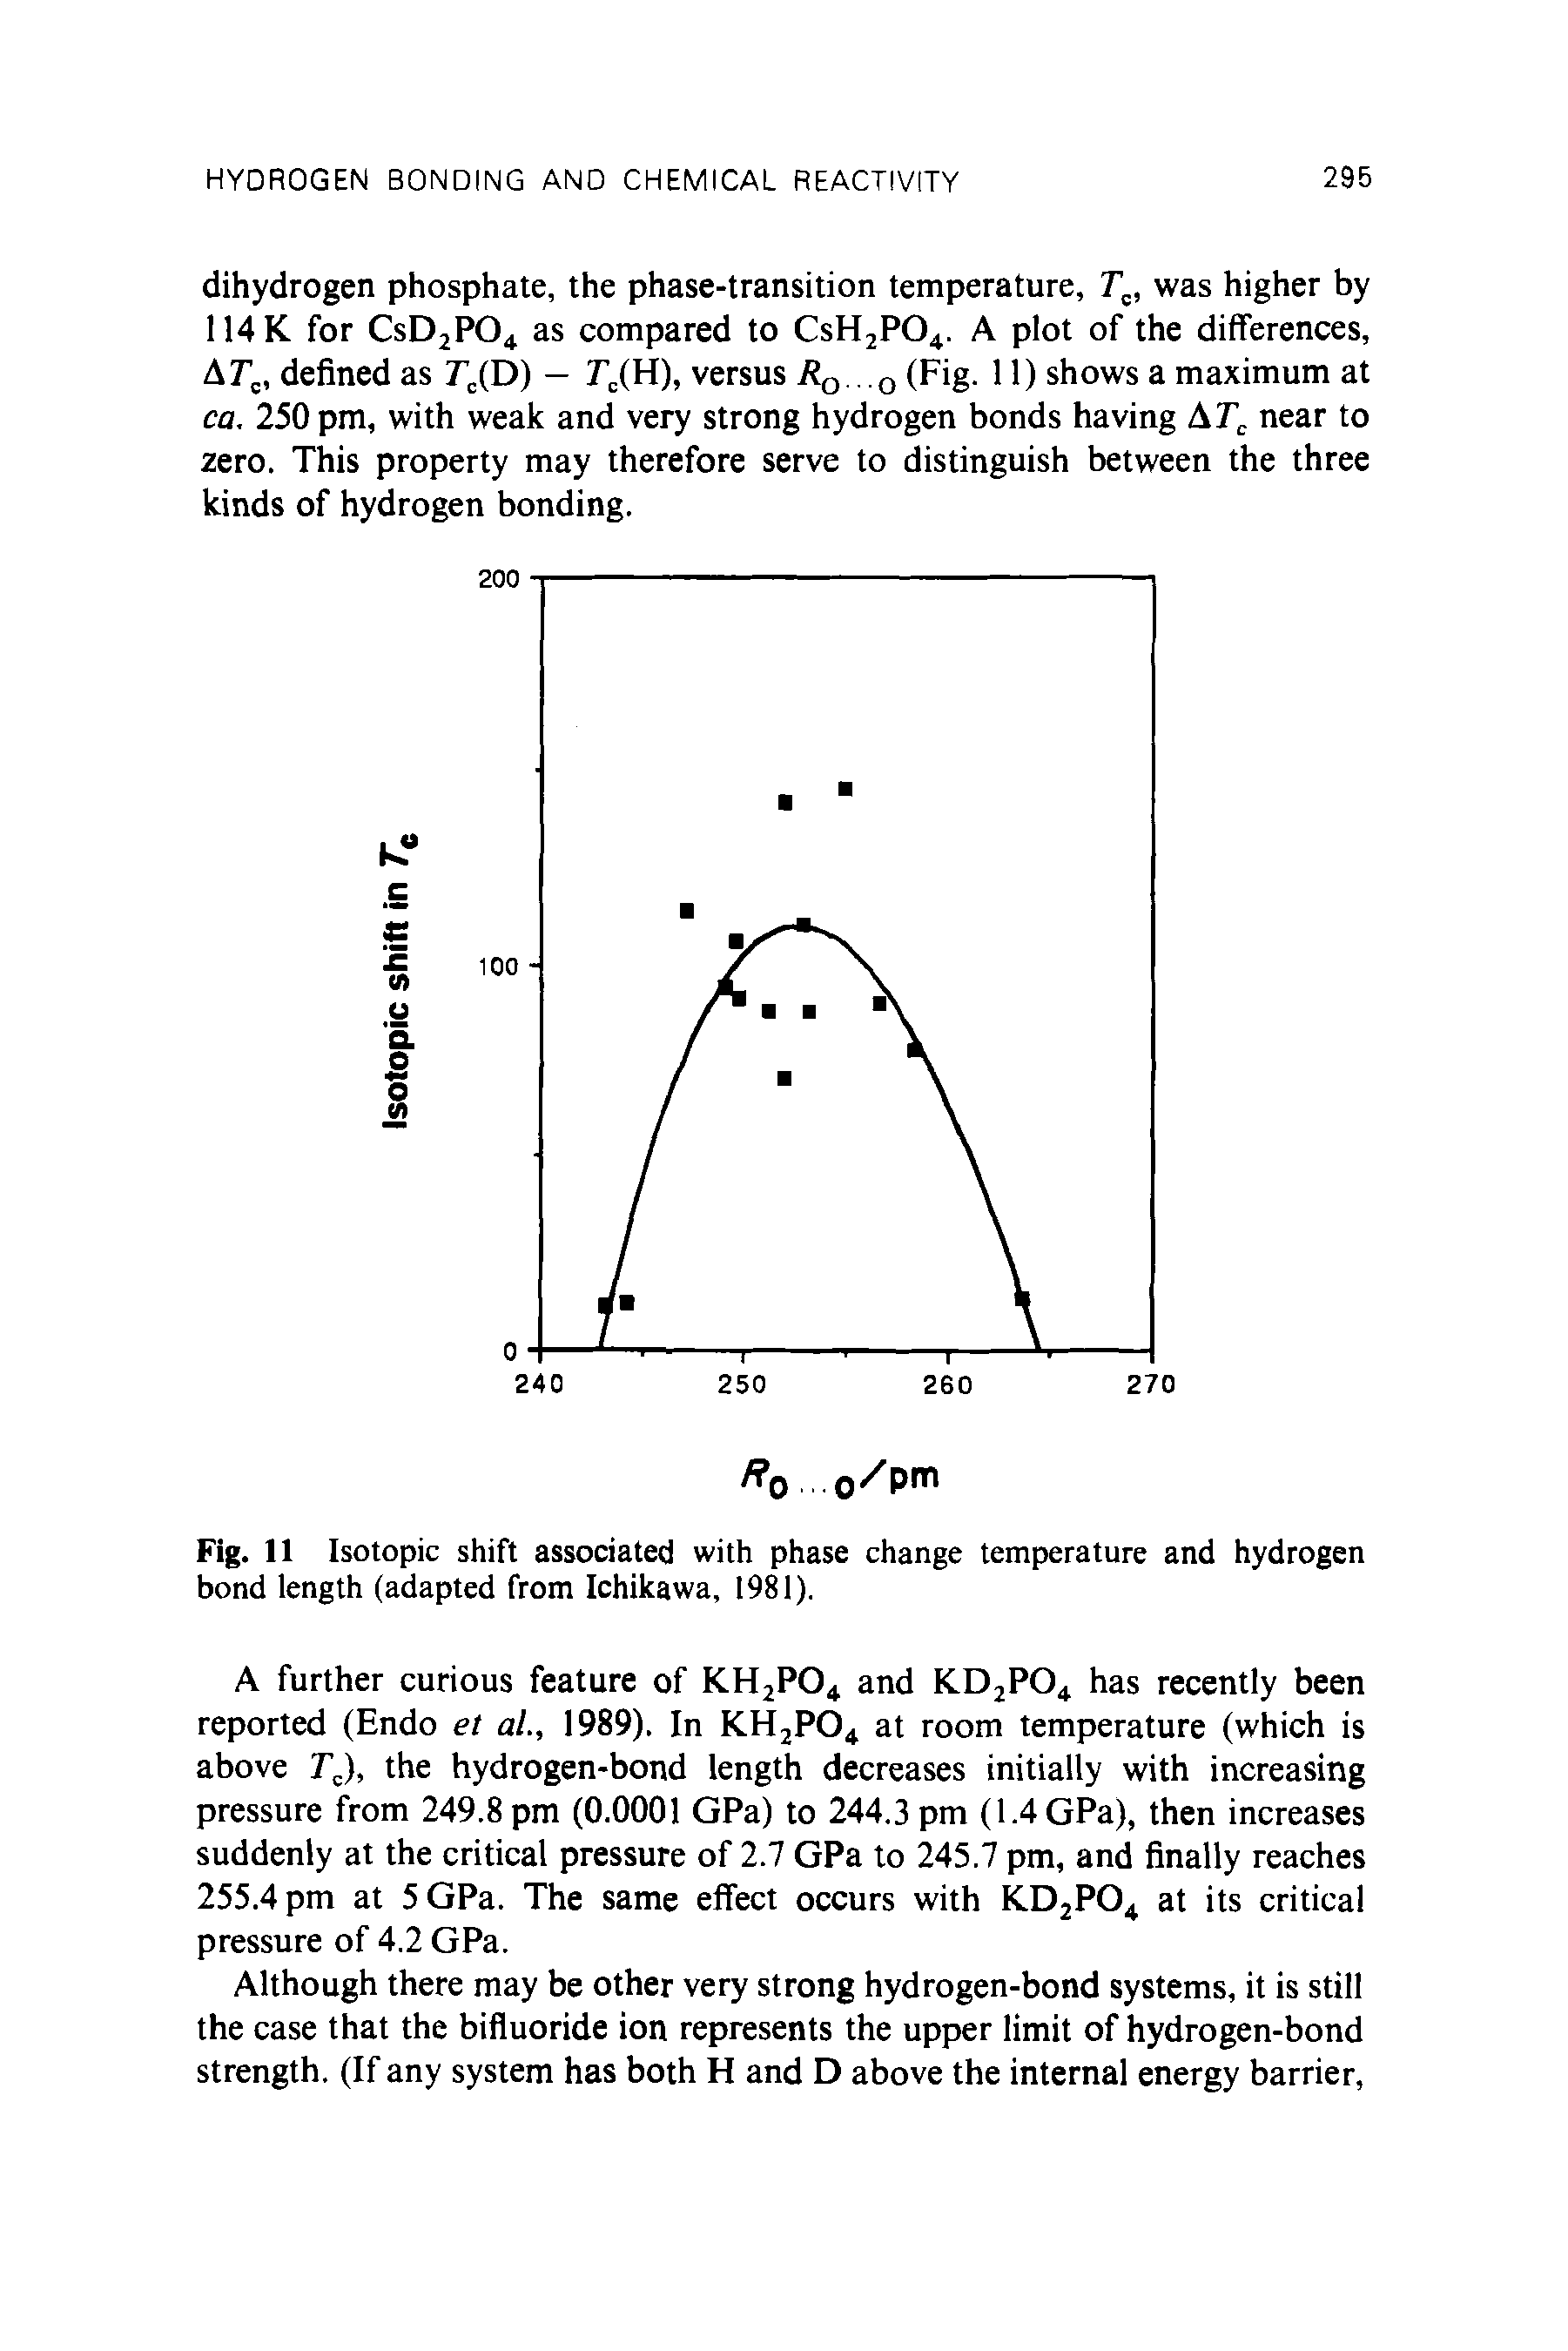 Fig. 11 Isotopic shift associated with phase change temperature and hydrogen bond length (adapted from Ichikawa, 1981).